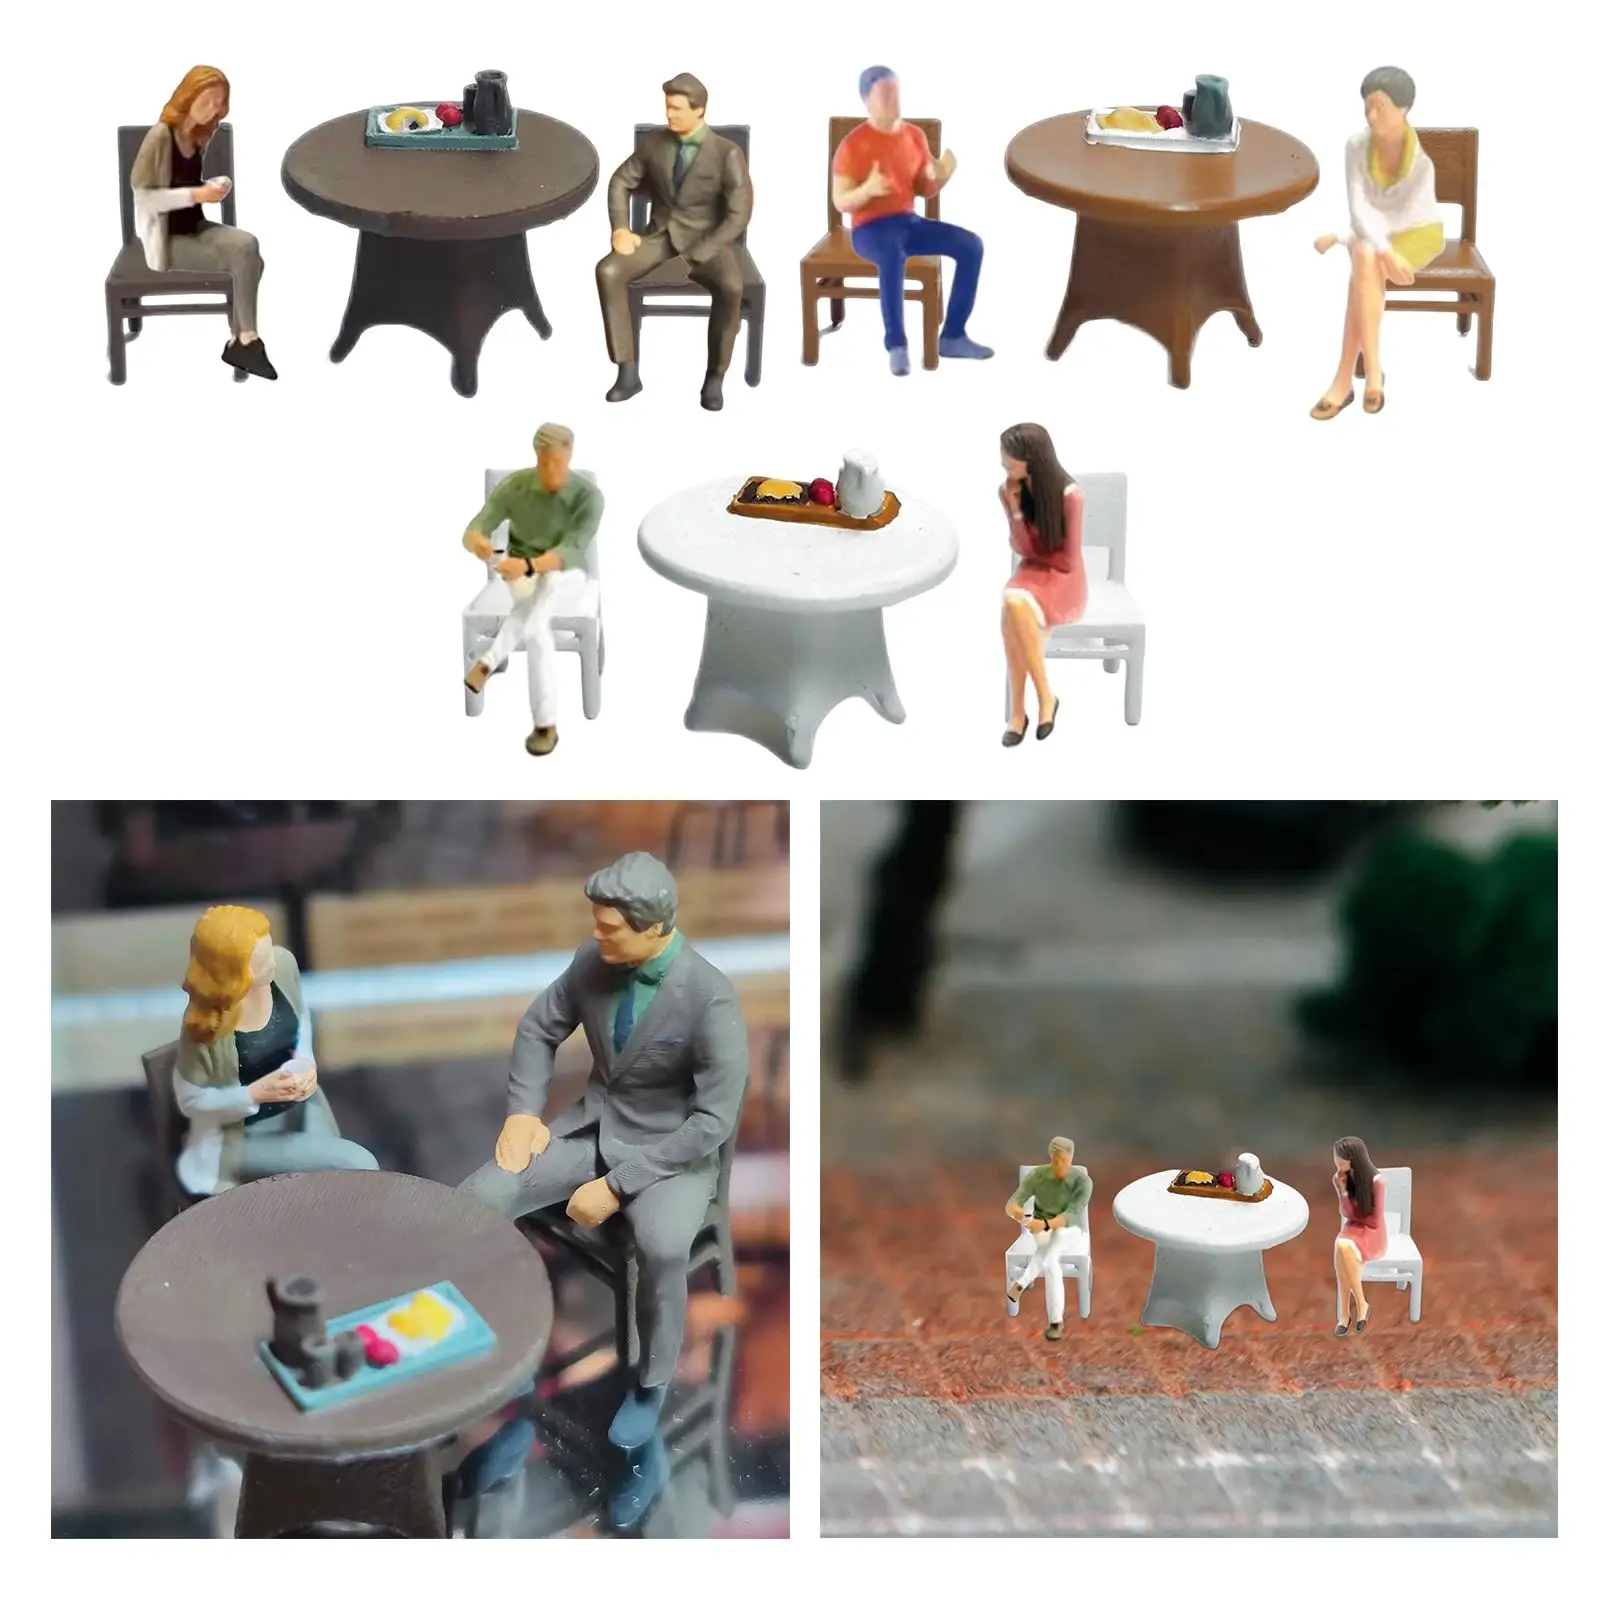 1:64 Diorama Street Character Figure Realistic Tiny People Model for Dollhouse Photography Props Scenery Landscape Diorama Decor